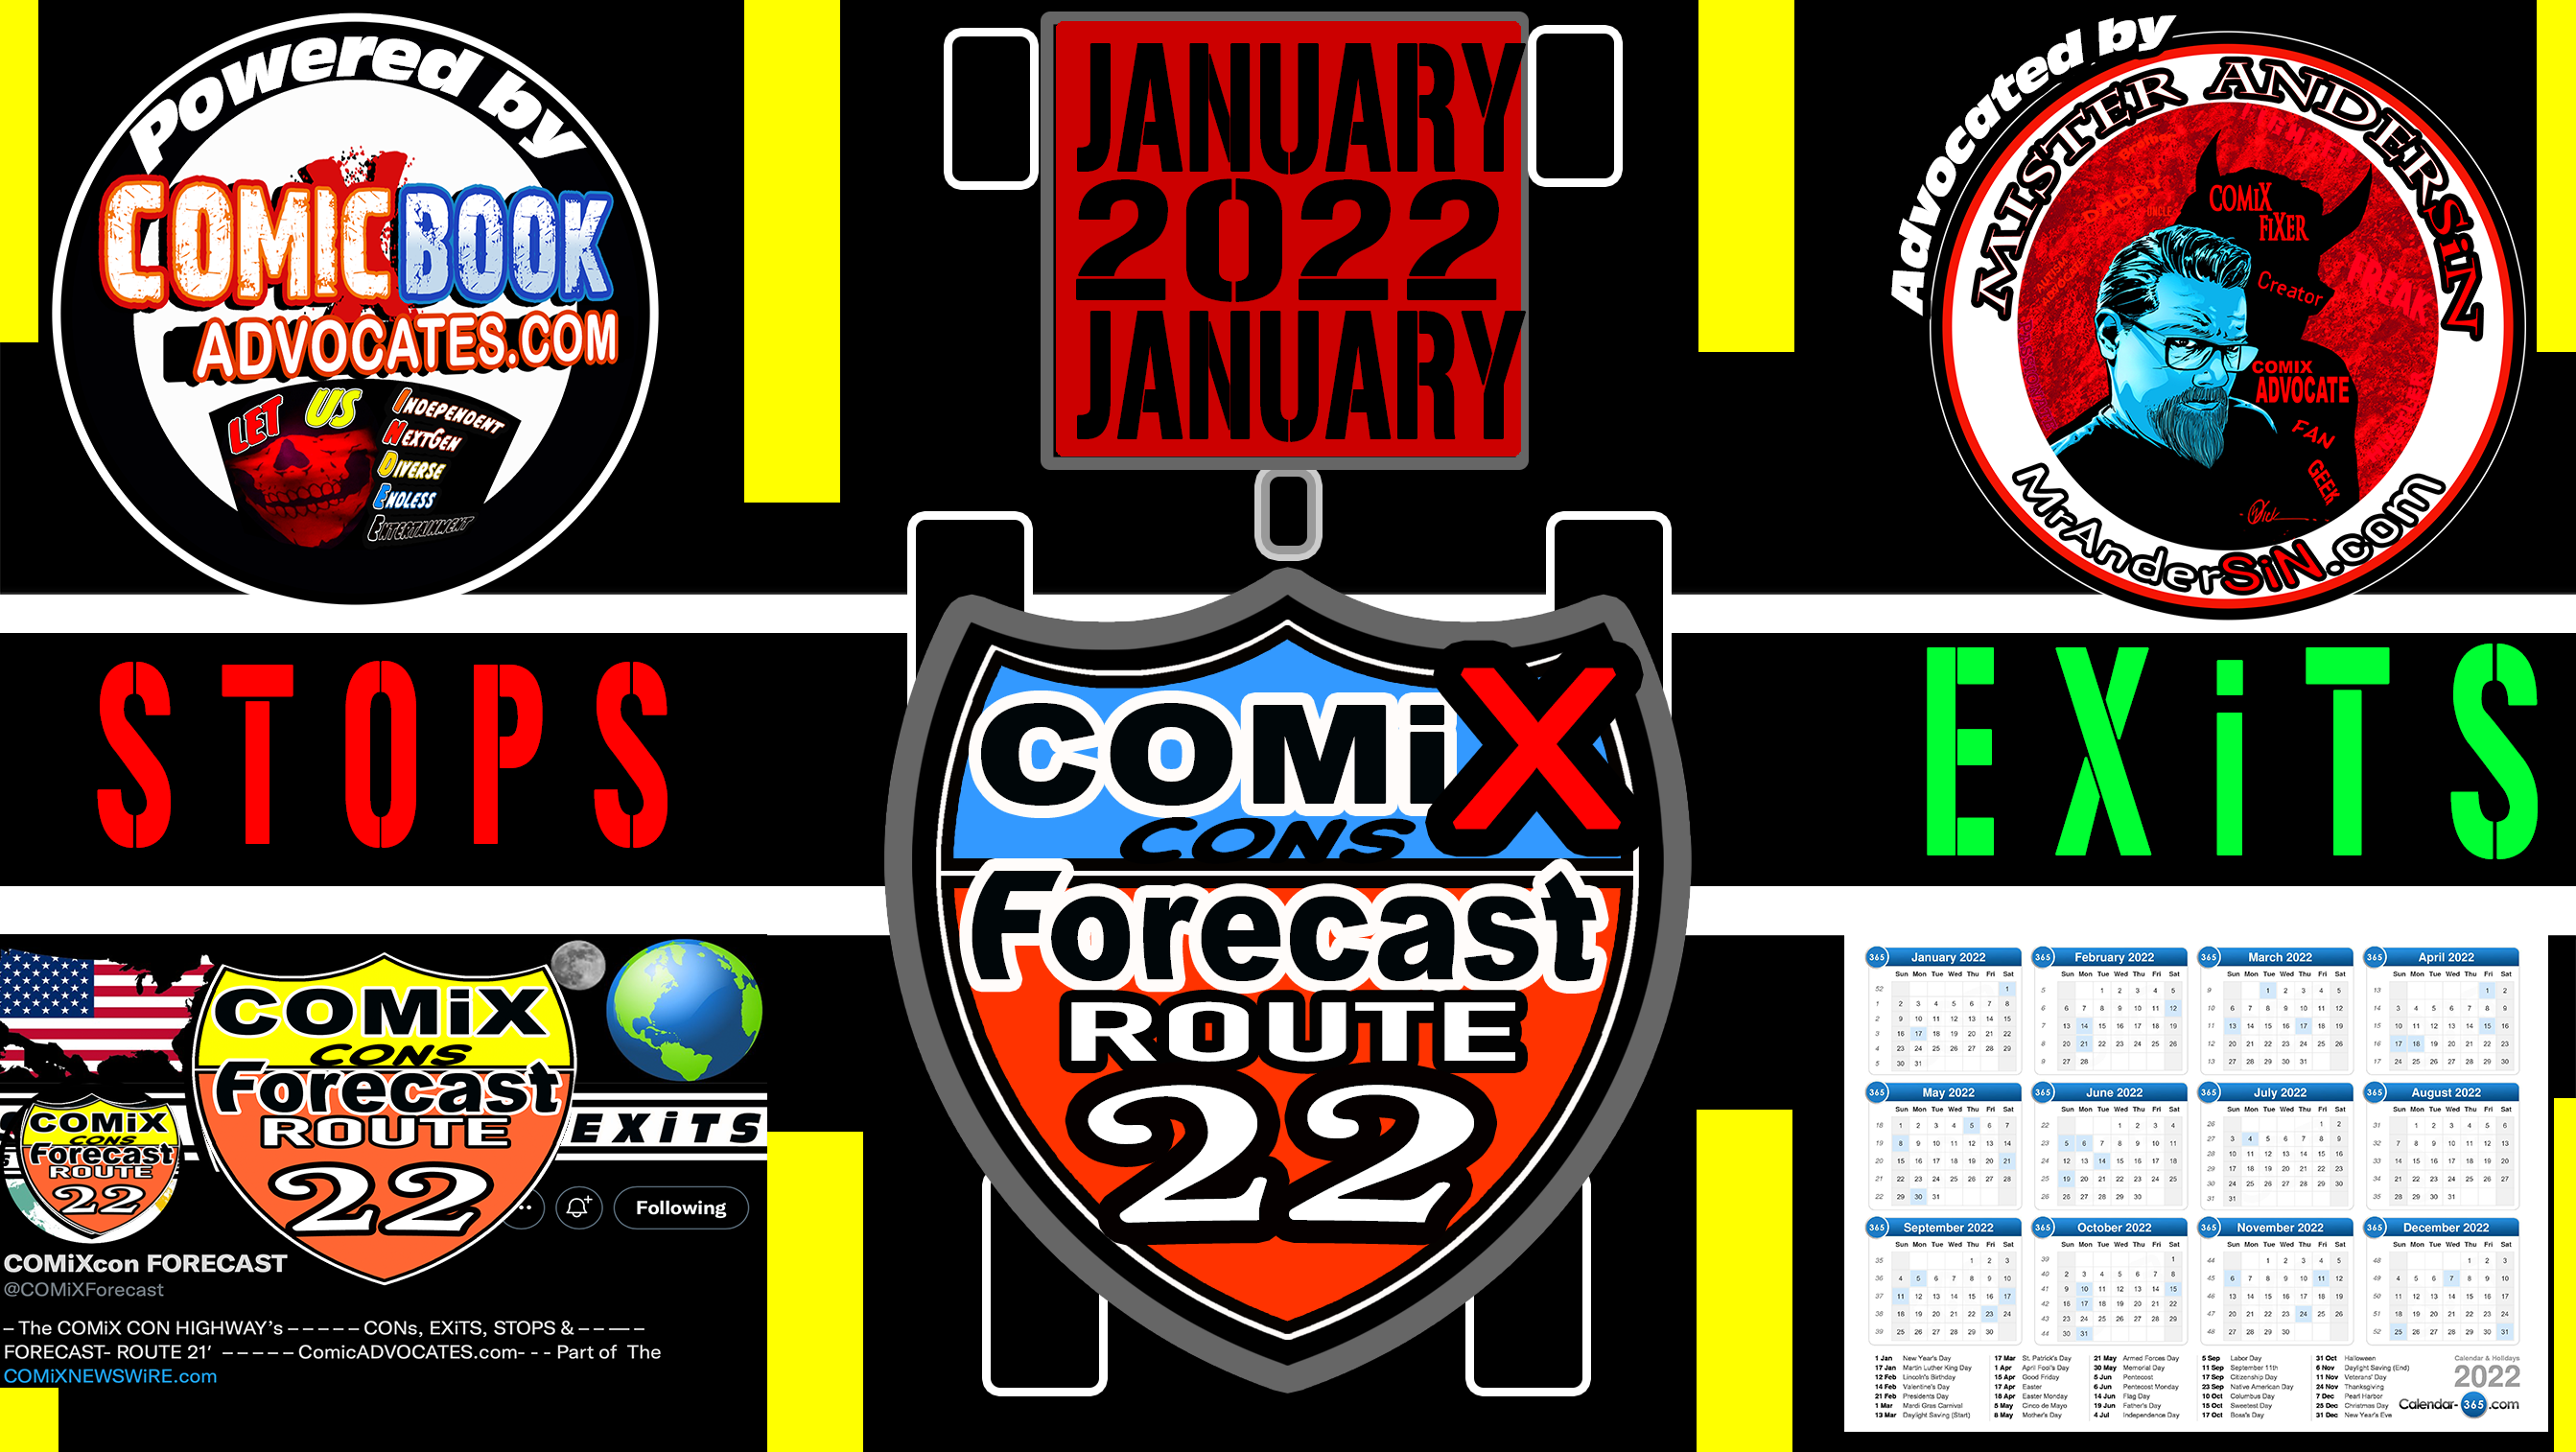 COMiXcon FORECAST for THE LAST WEEK WEEK Jan 2022